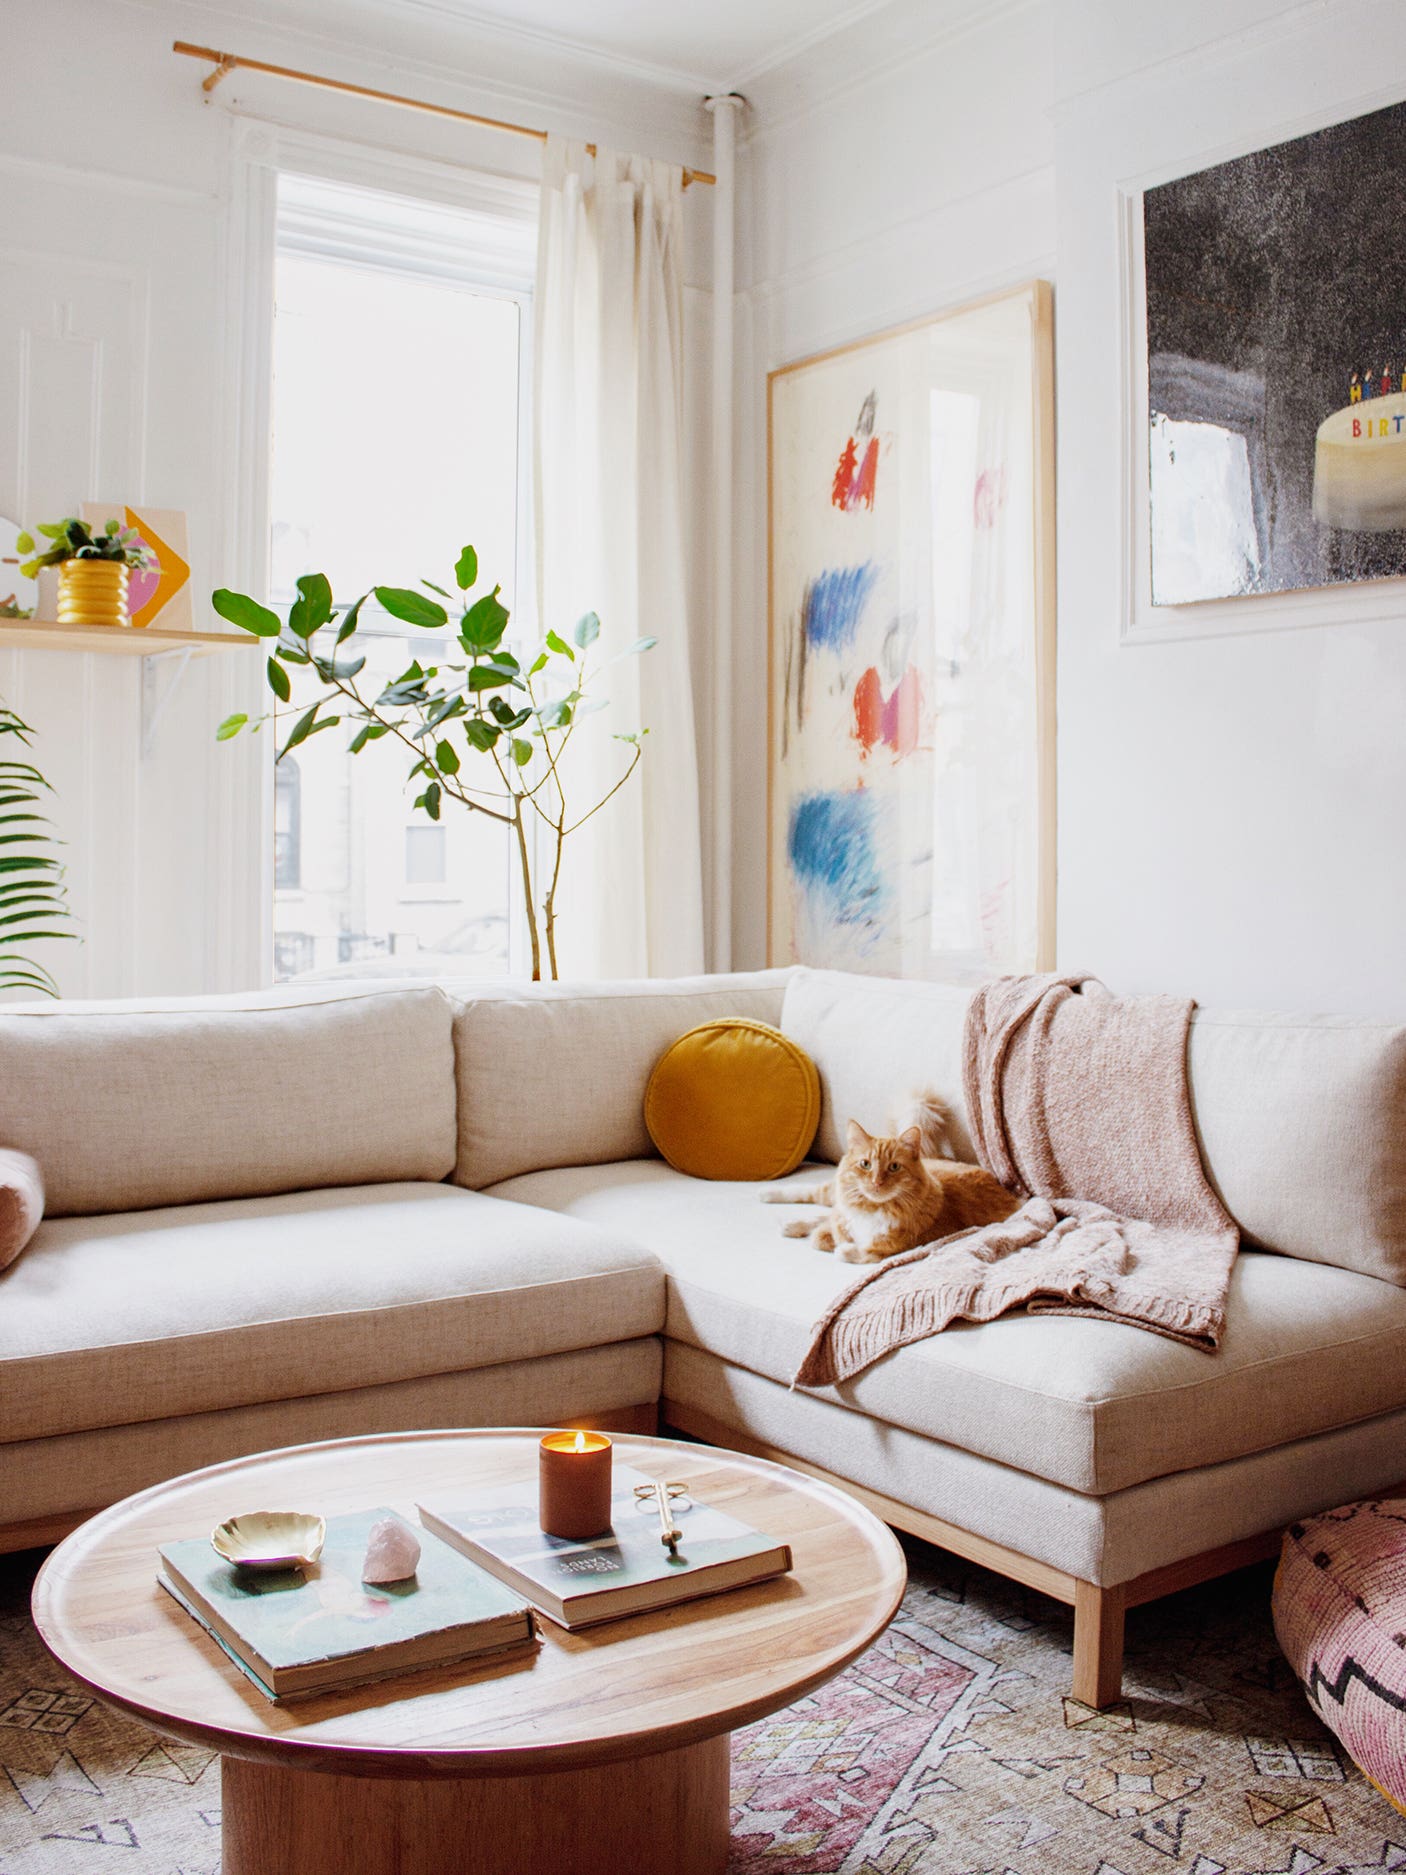 This Instagram-Famous Living Room Just Got a Sophisticated Makeover